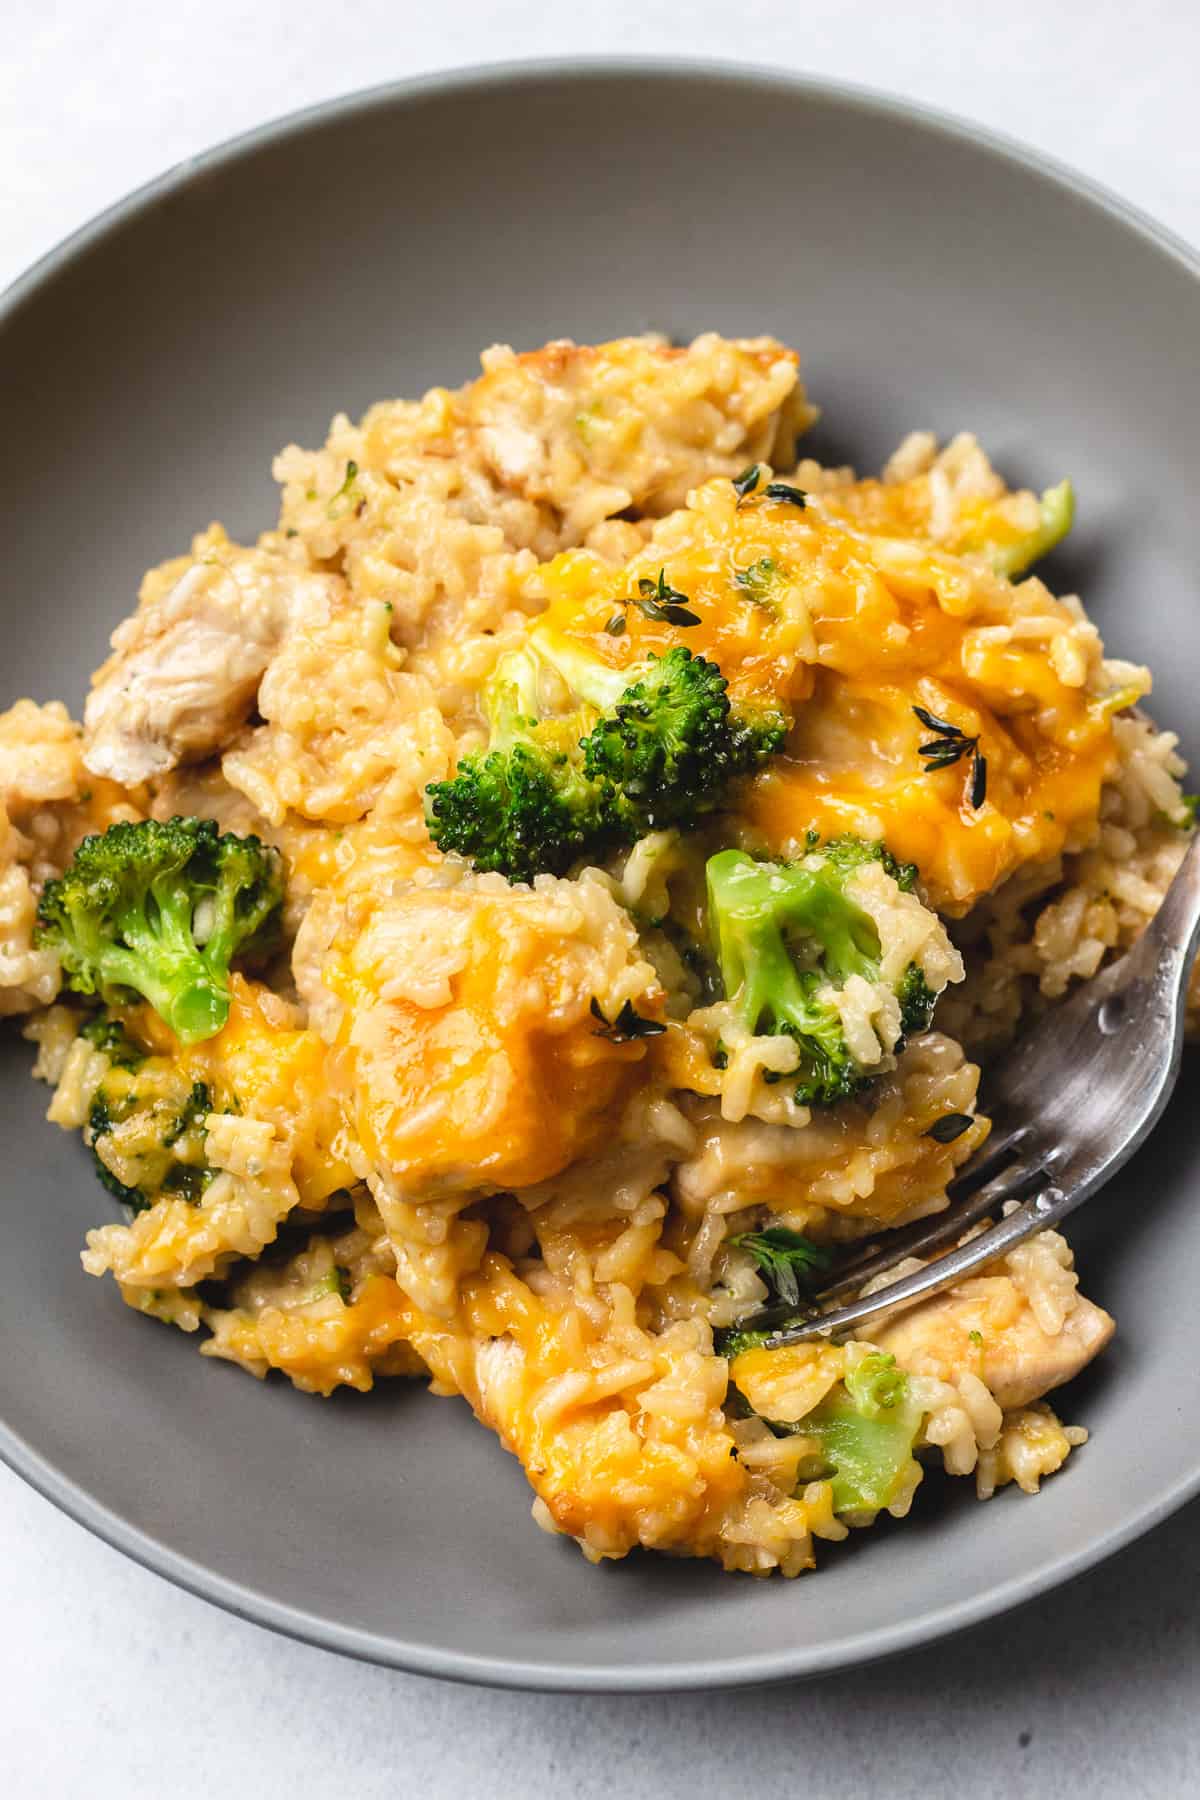 Chicken and rice with broccoli and melted cheese in a grey bowl.